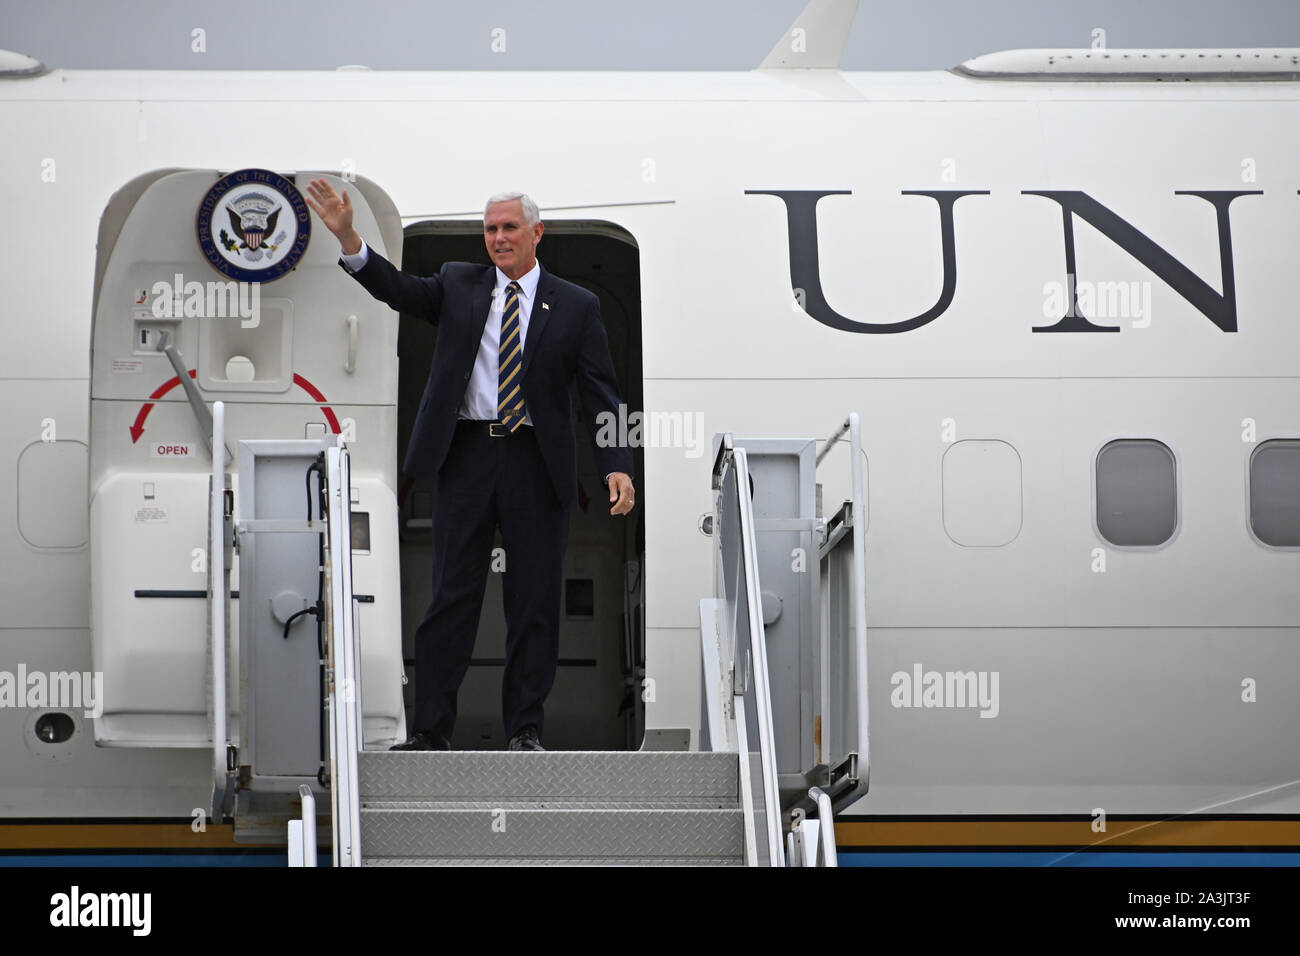 Vice President Mike Pence waves to people from the ramp Oct. 7, 2019 at Berry Field Air National Guard Base, Nashville, Tenn. Pence briefly visited with people at Berry Field before leaving for several events in the greater Nashville area. (U.S. Air National Guard photo by Staff Sgt. Anthony Agosti) Stock Photo